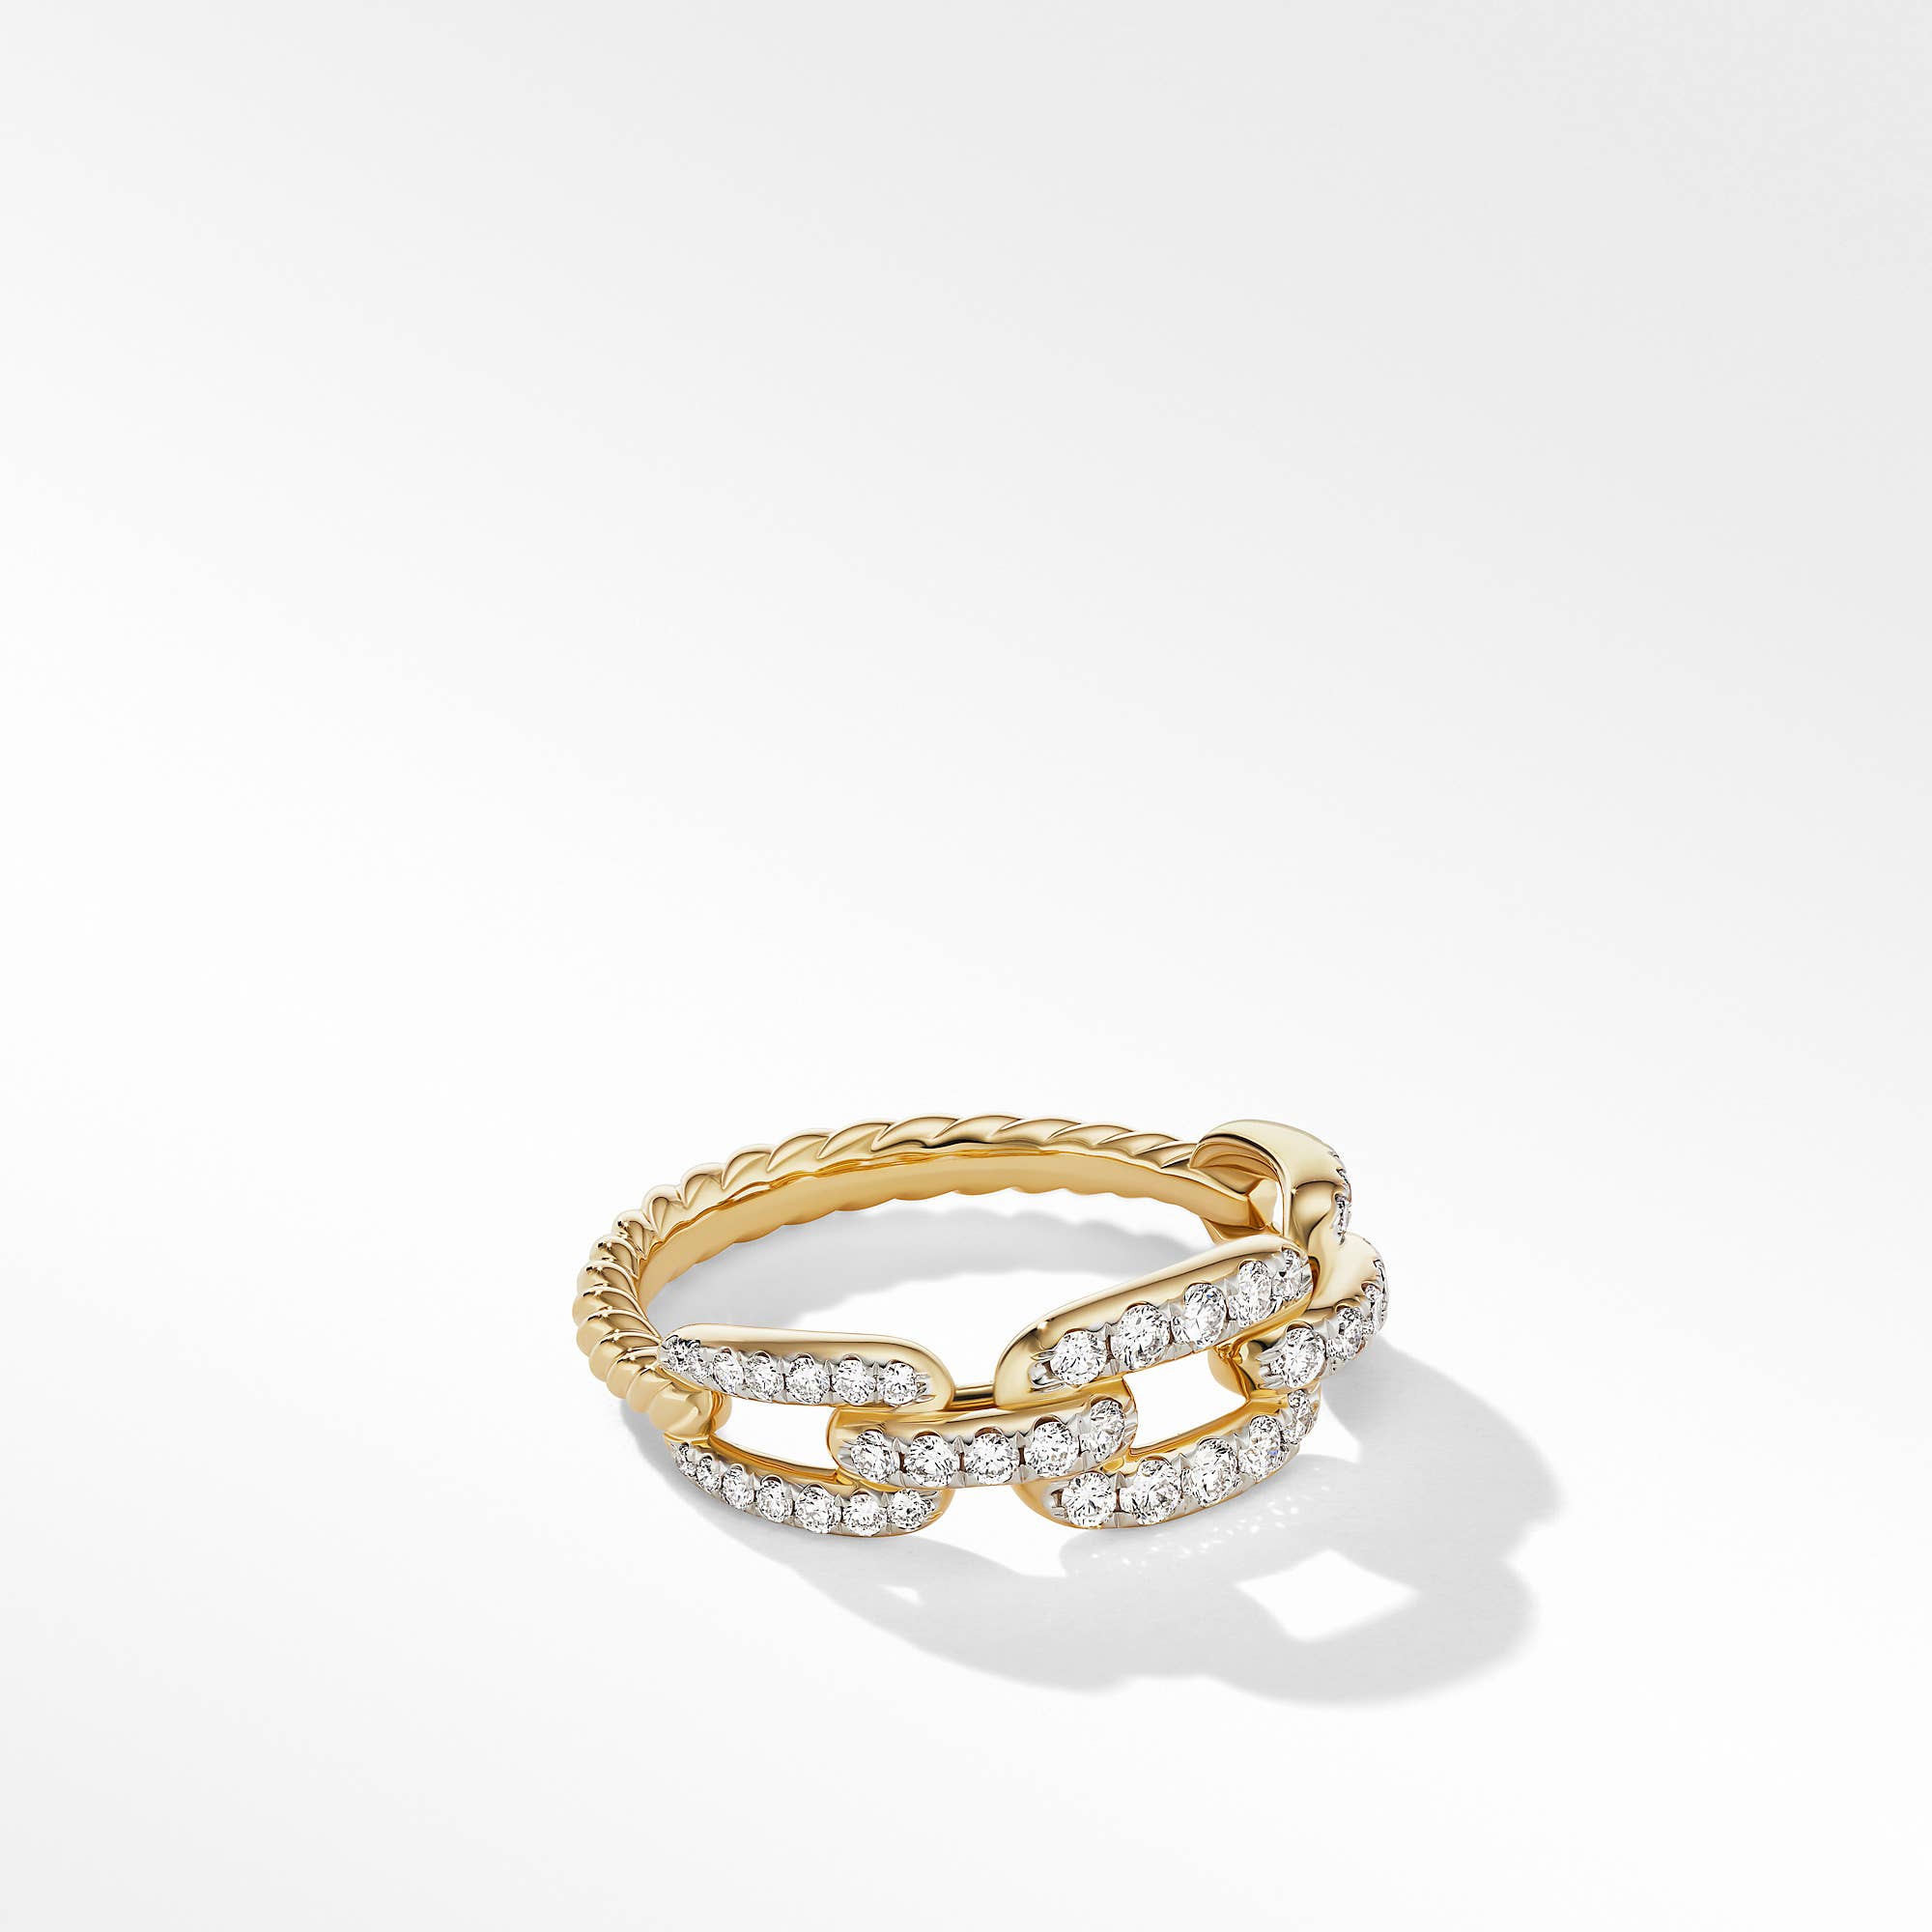 Shop Stax chain link ring.